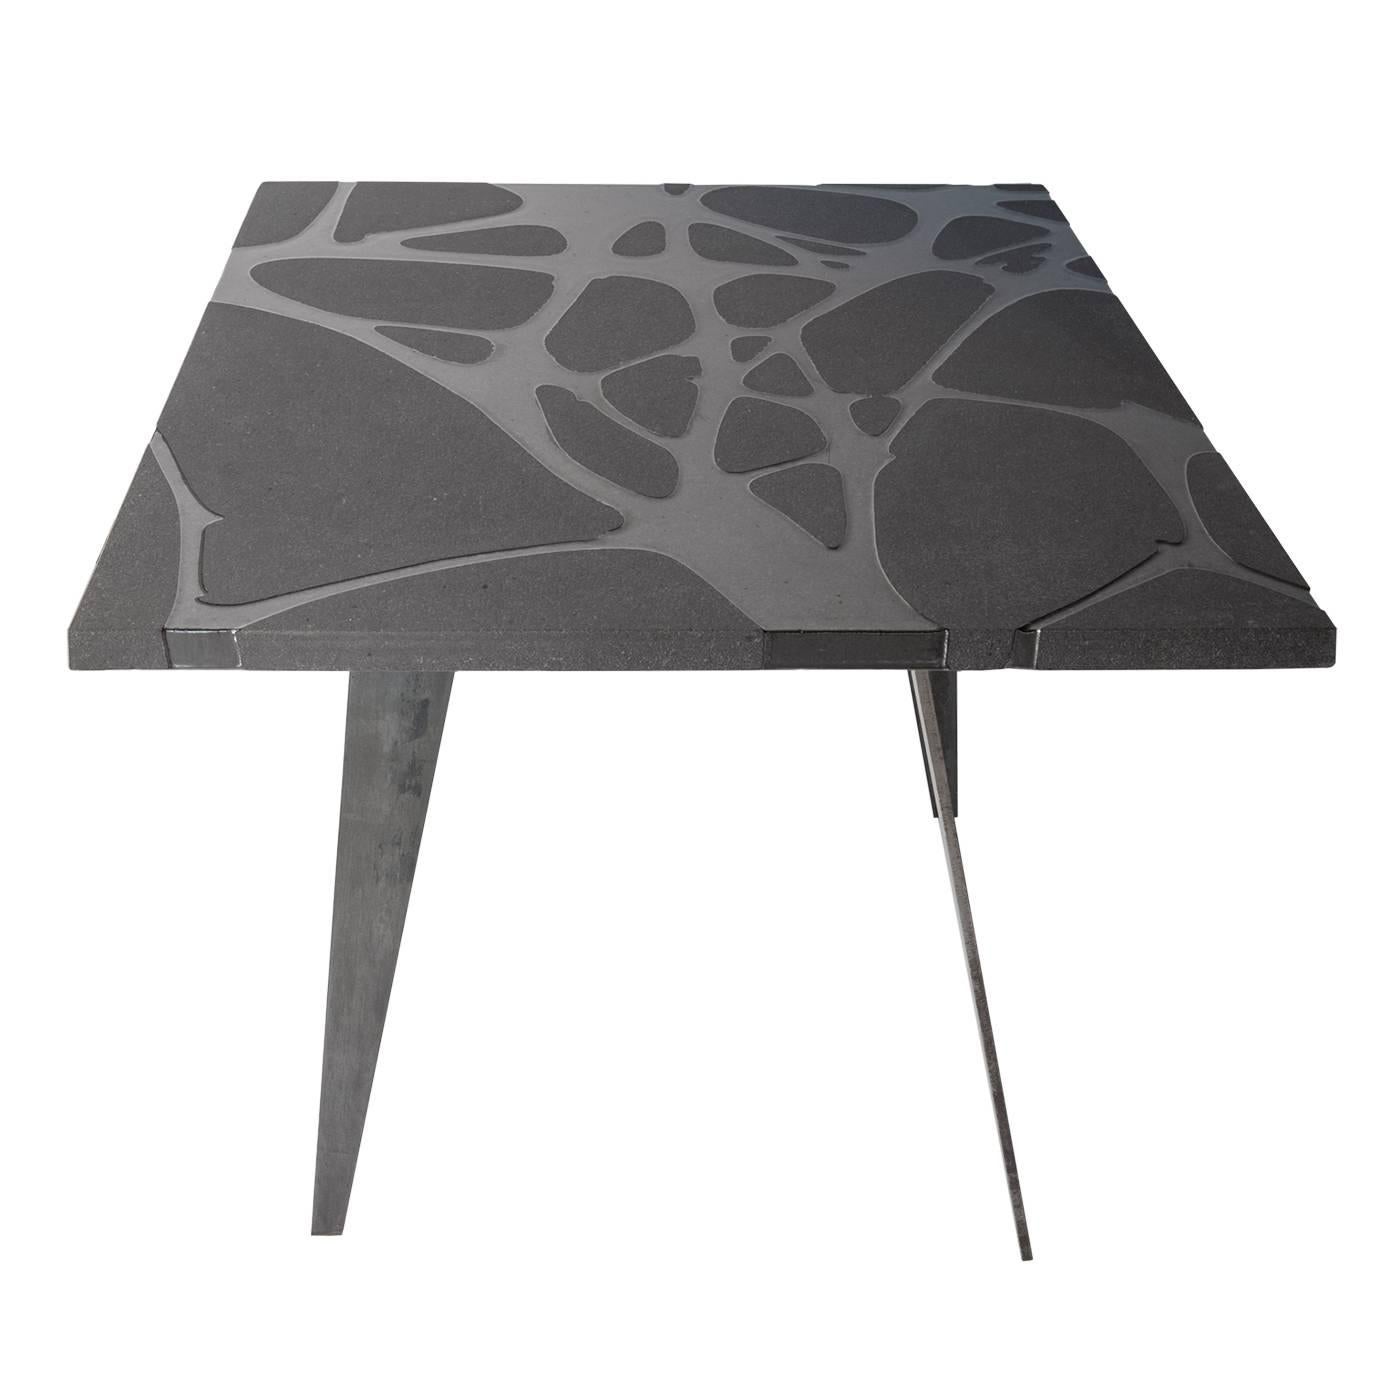 Filodifumo is a contemporary square outdoor table with top in lava stone and steel legs.
It is made with solid and compact matter.
High precision machinaries engrave on the lava stone surface 